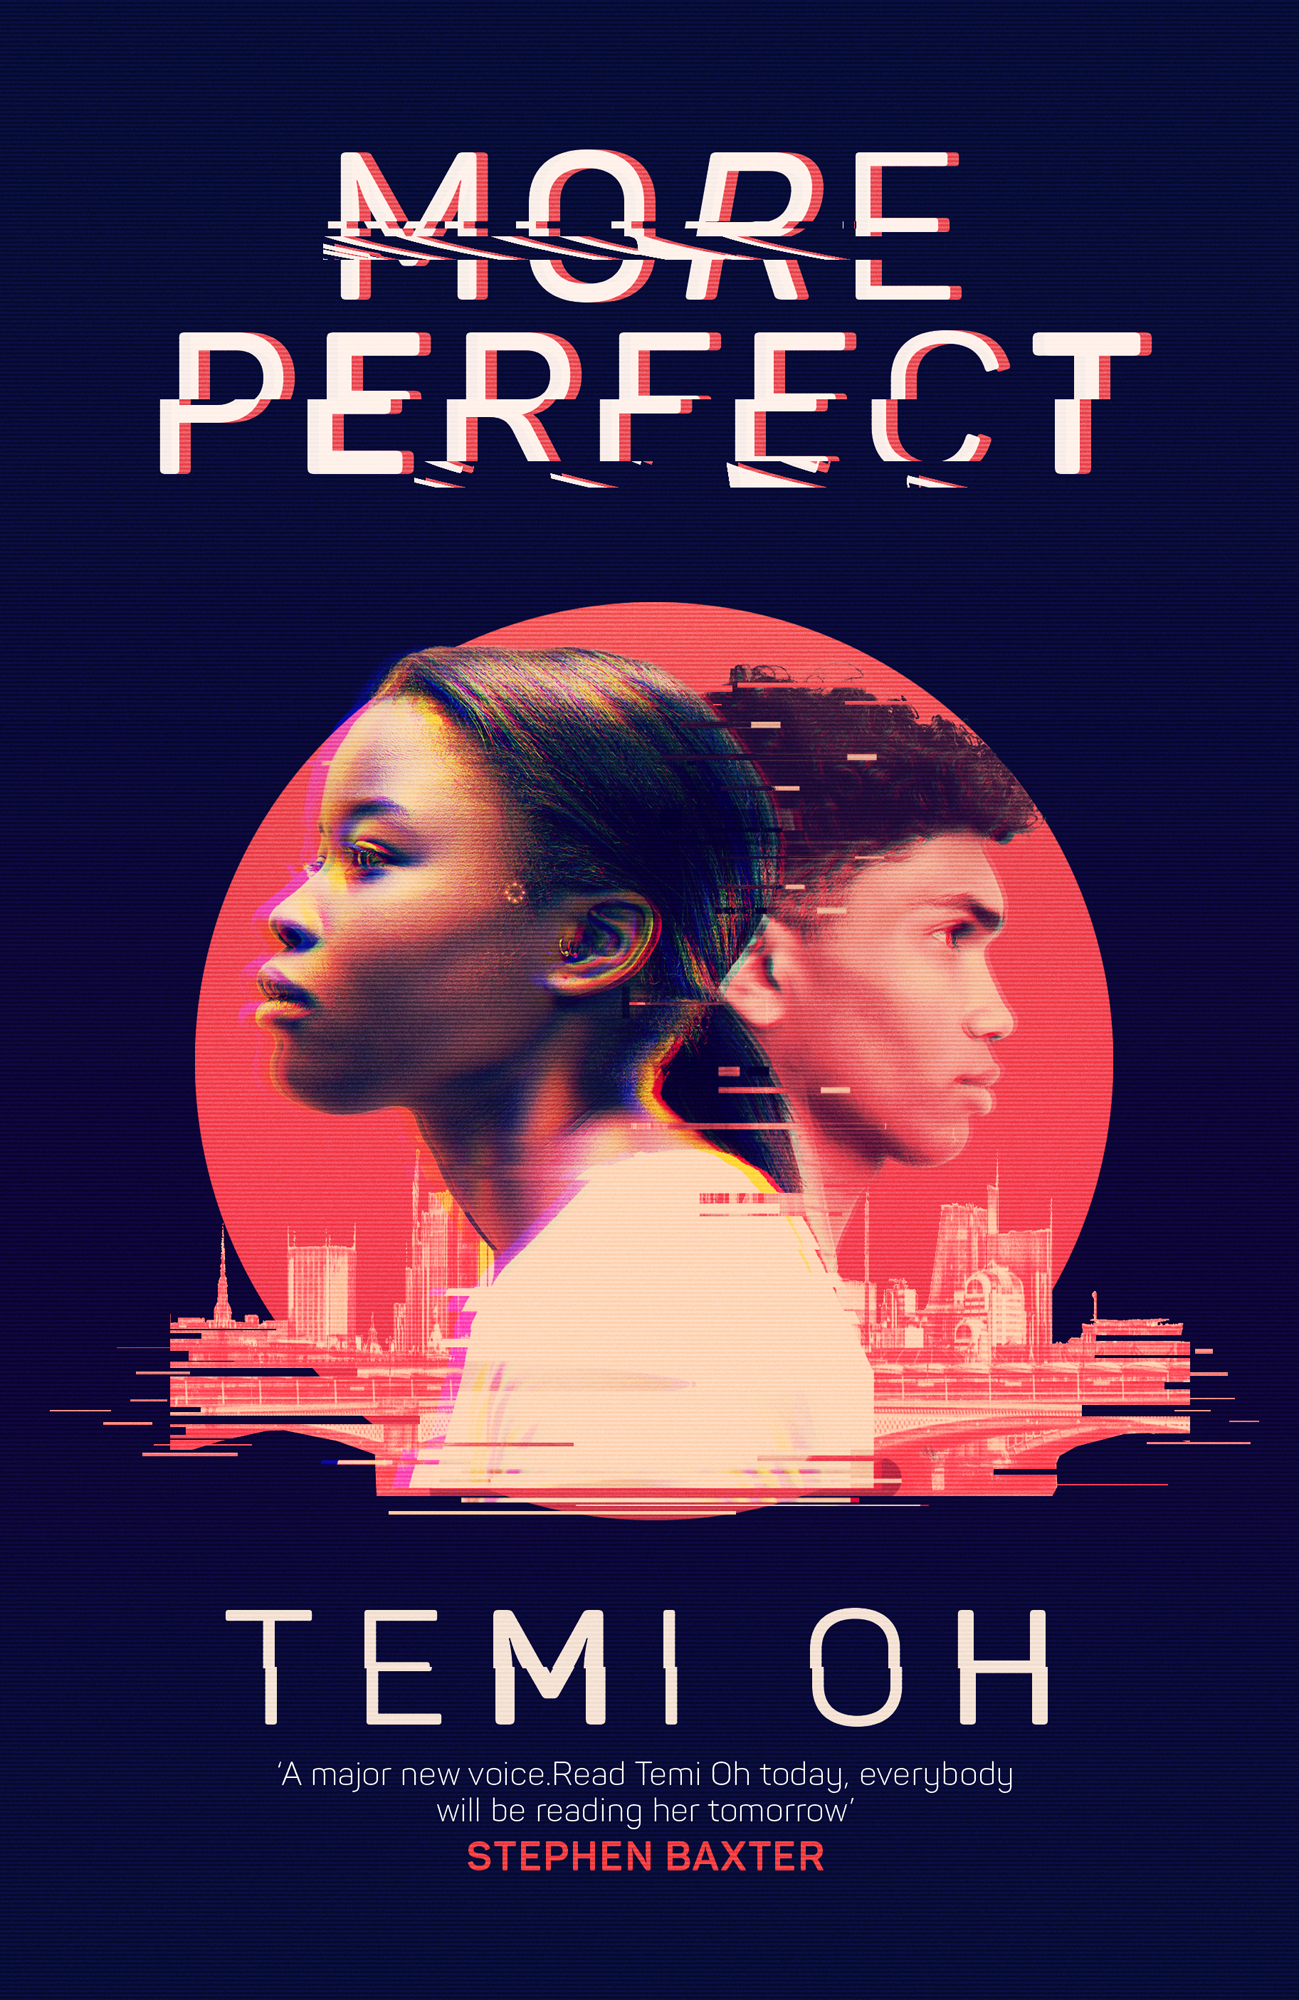 More Perfect: The Circle meets Inception in this moving exploration of tech and connection.